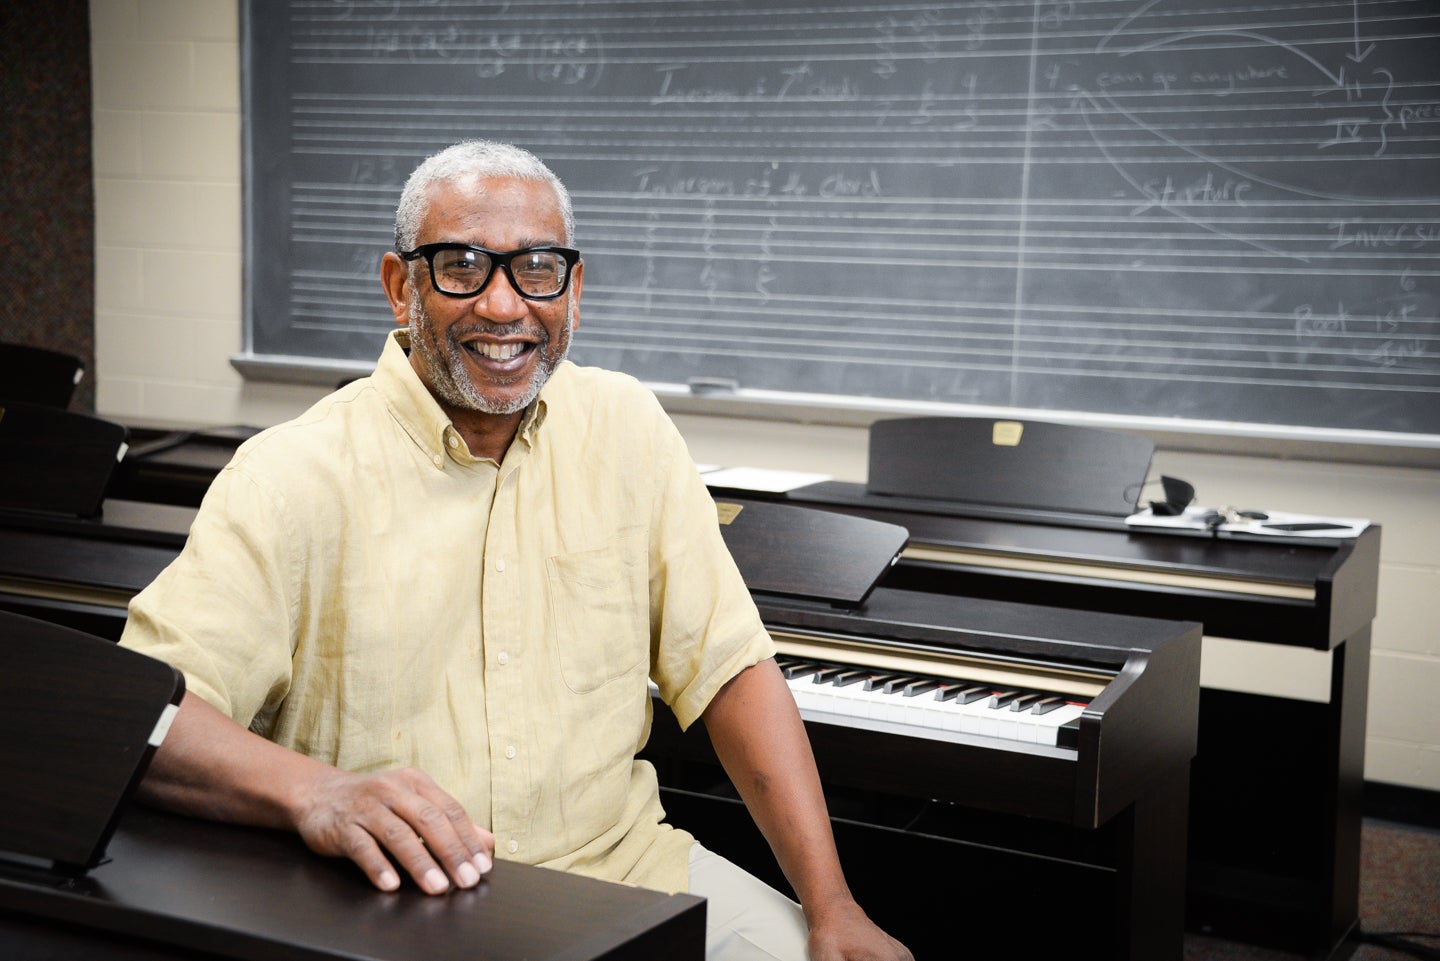 World musician: Dr. Keith McCutchen using numerous influences to share his musical language